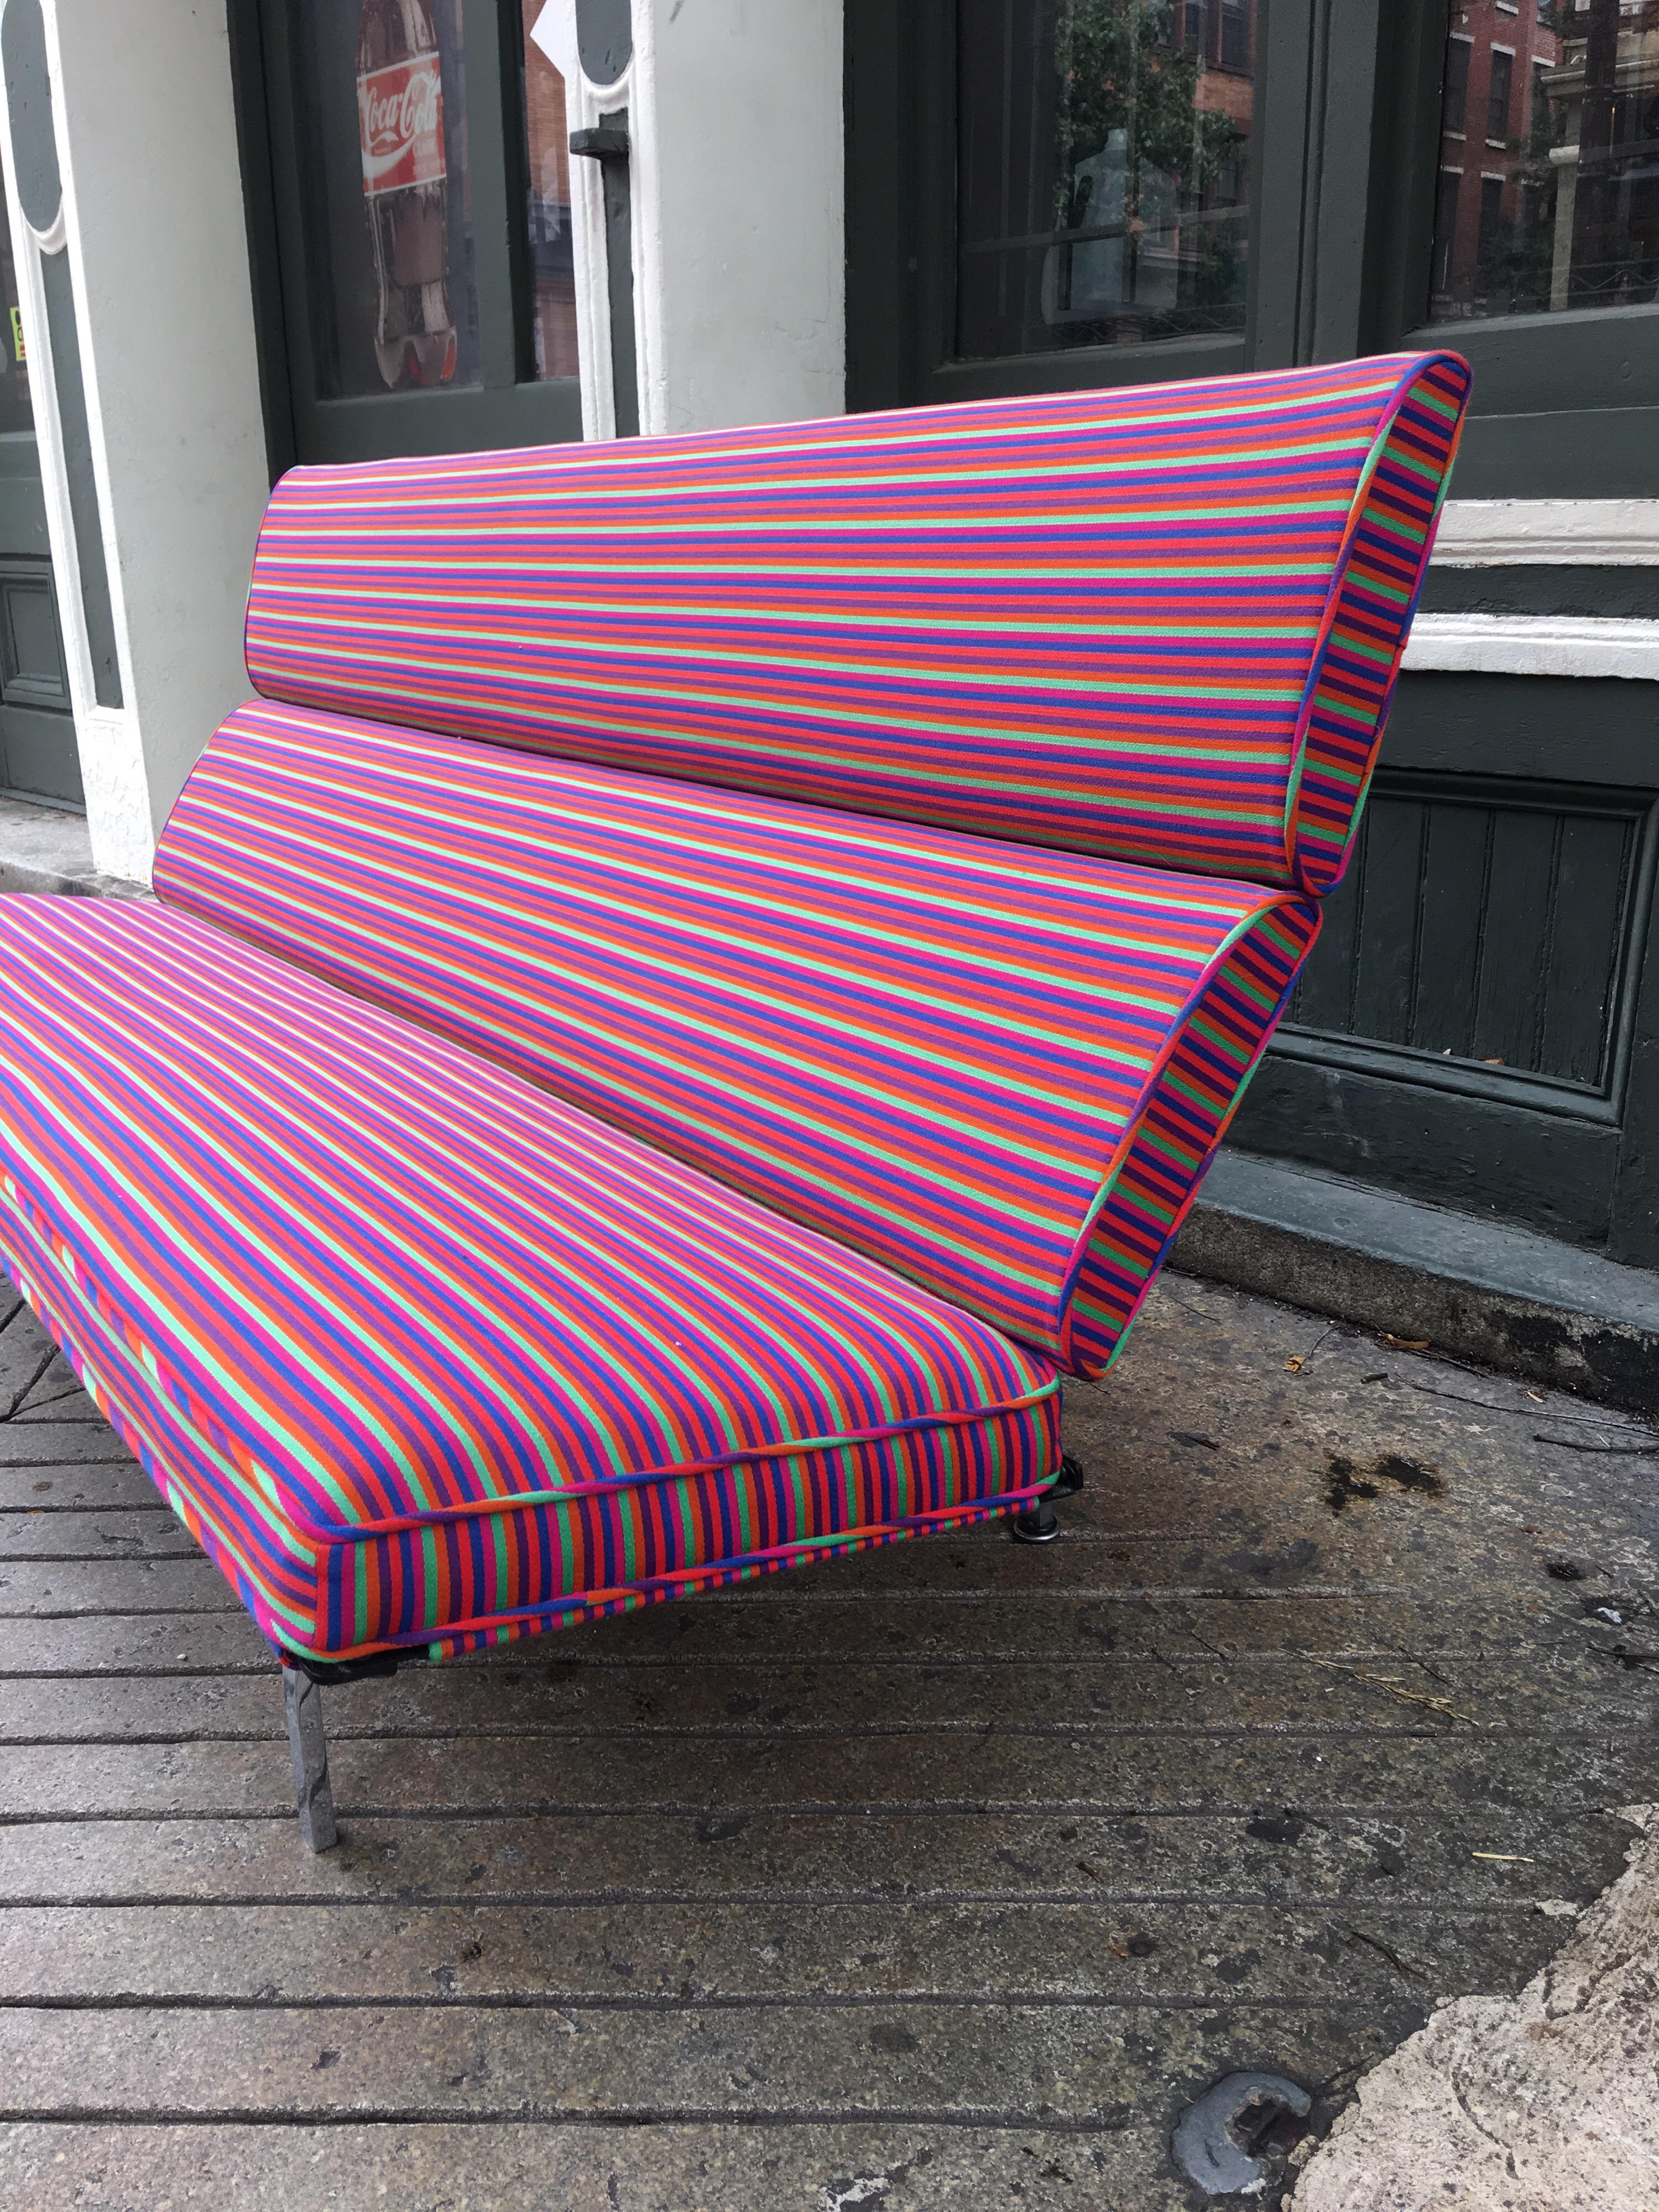 Beautiful Condition! All Original Alexander Girard Fabric! Eames Compact Sofa in Amazing Condition! No Fading, stains or dirt on this guy! We did have new foam put in the Seat Cushion! Sits Beautifully, one of the best Girard Fabric out there!!